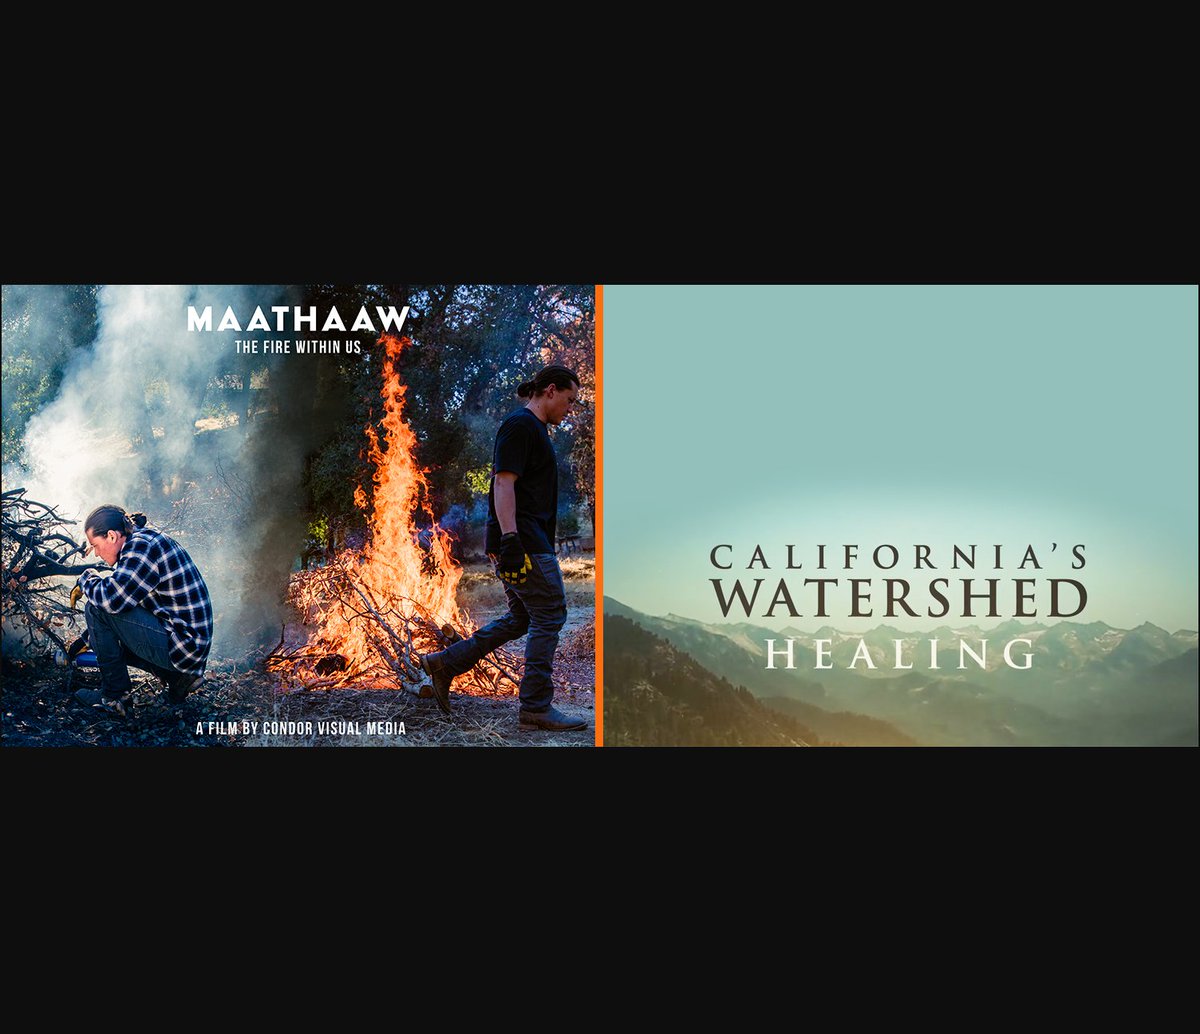 New films showcase paths forward to heal CA’s relationships w/fire and watersheds! #MAATHAAWFilm - SoCal Tribes and the gift of fire. California’s Watershed Healing - restoring forests has cascading benefits. bit.ly/TF-New-Films @CSAinAction @CA_CECS @TheChroniclesG